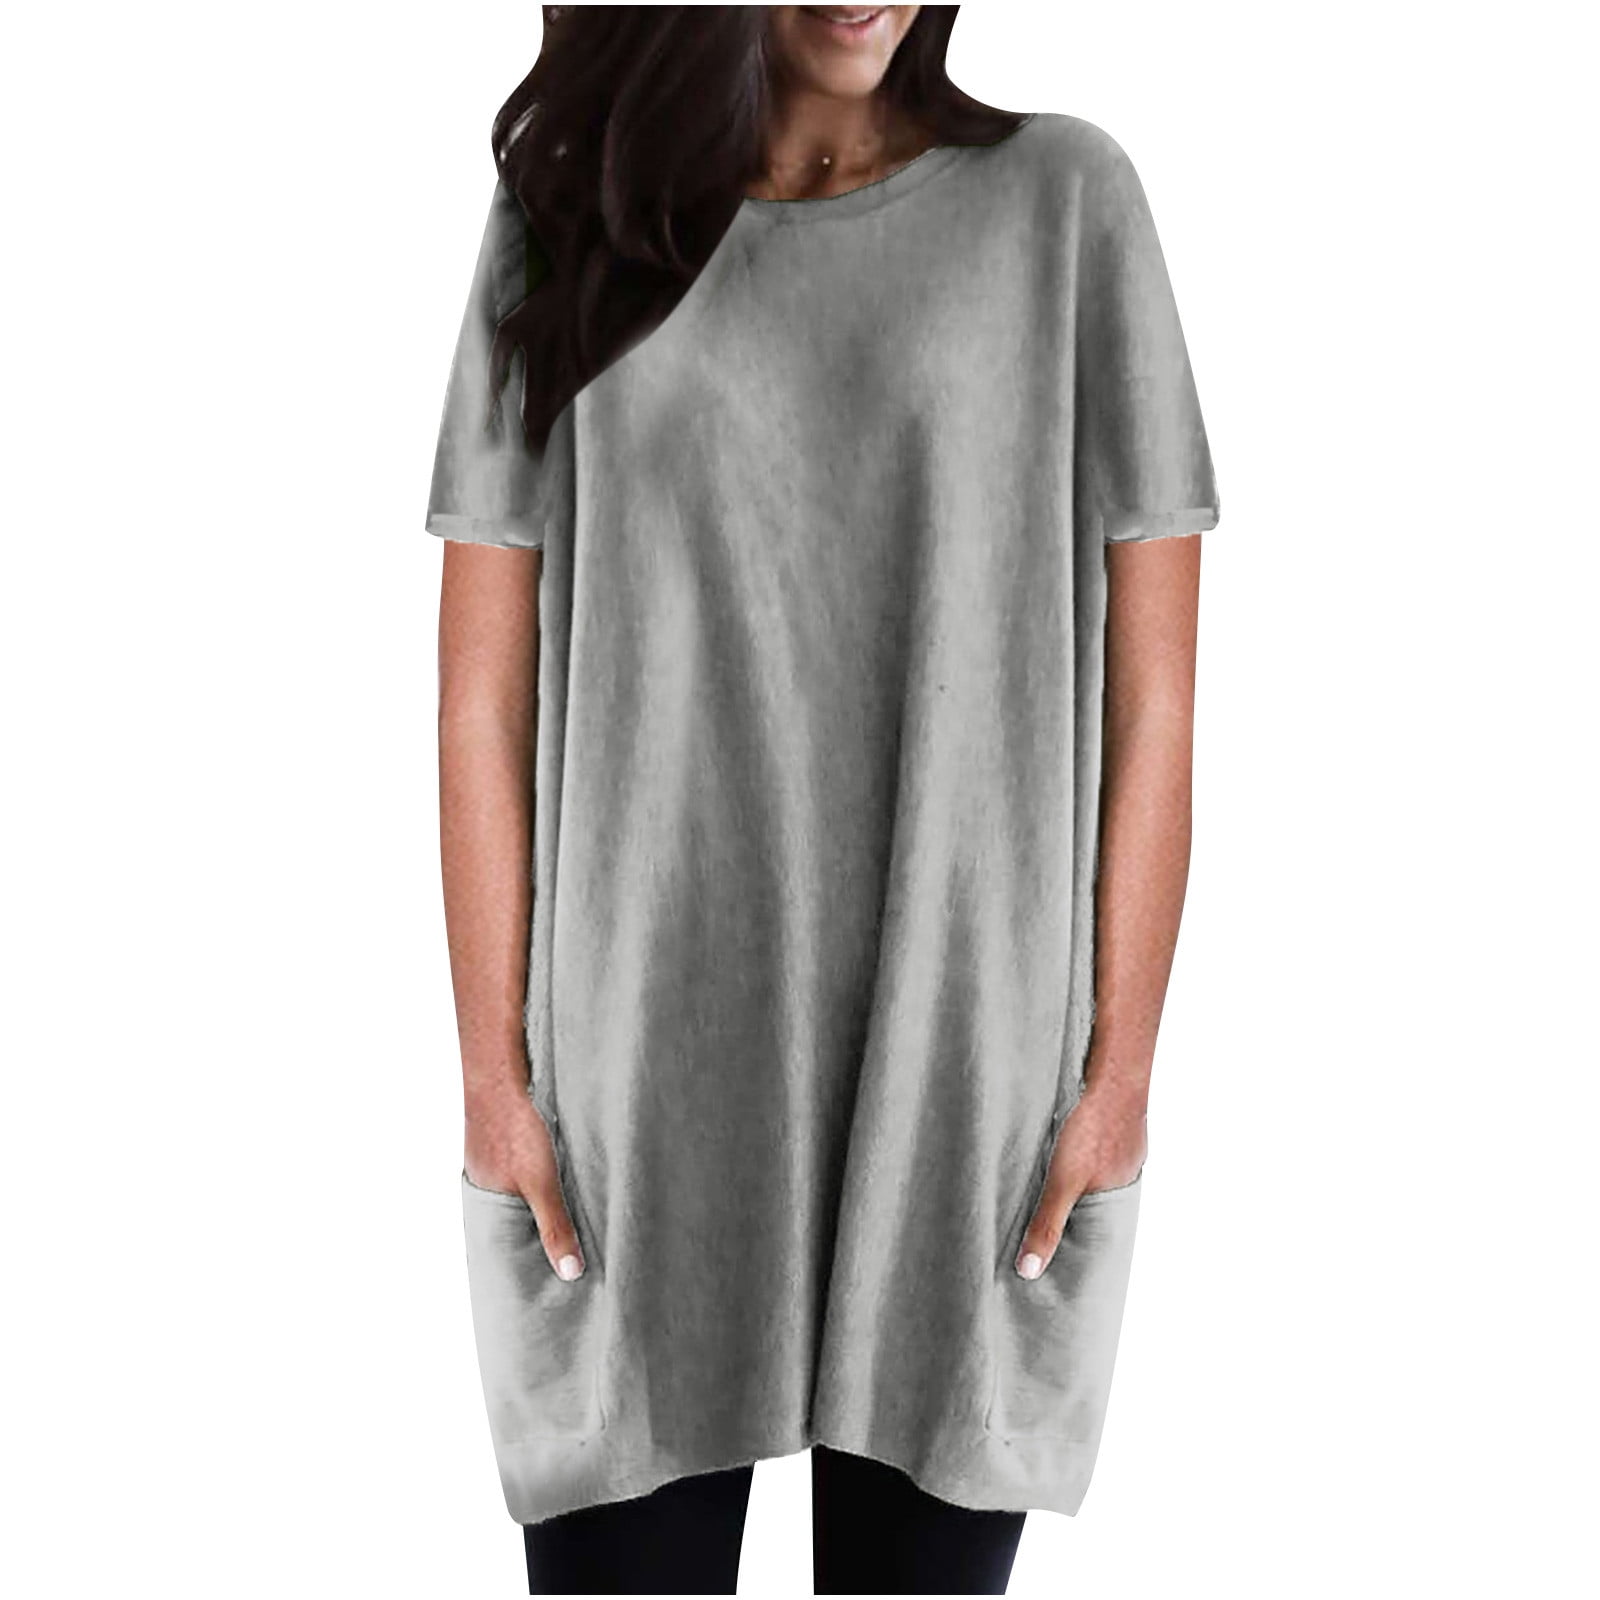 RQYYD Women's Plus Size Tops Summer Short Sleeve Crewneck Long Tunic Tops  Casual Solid Oversized Shirt Blouse to wear with leggings with Pockets(Gray,3XL)  